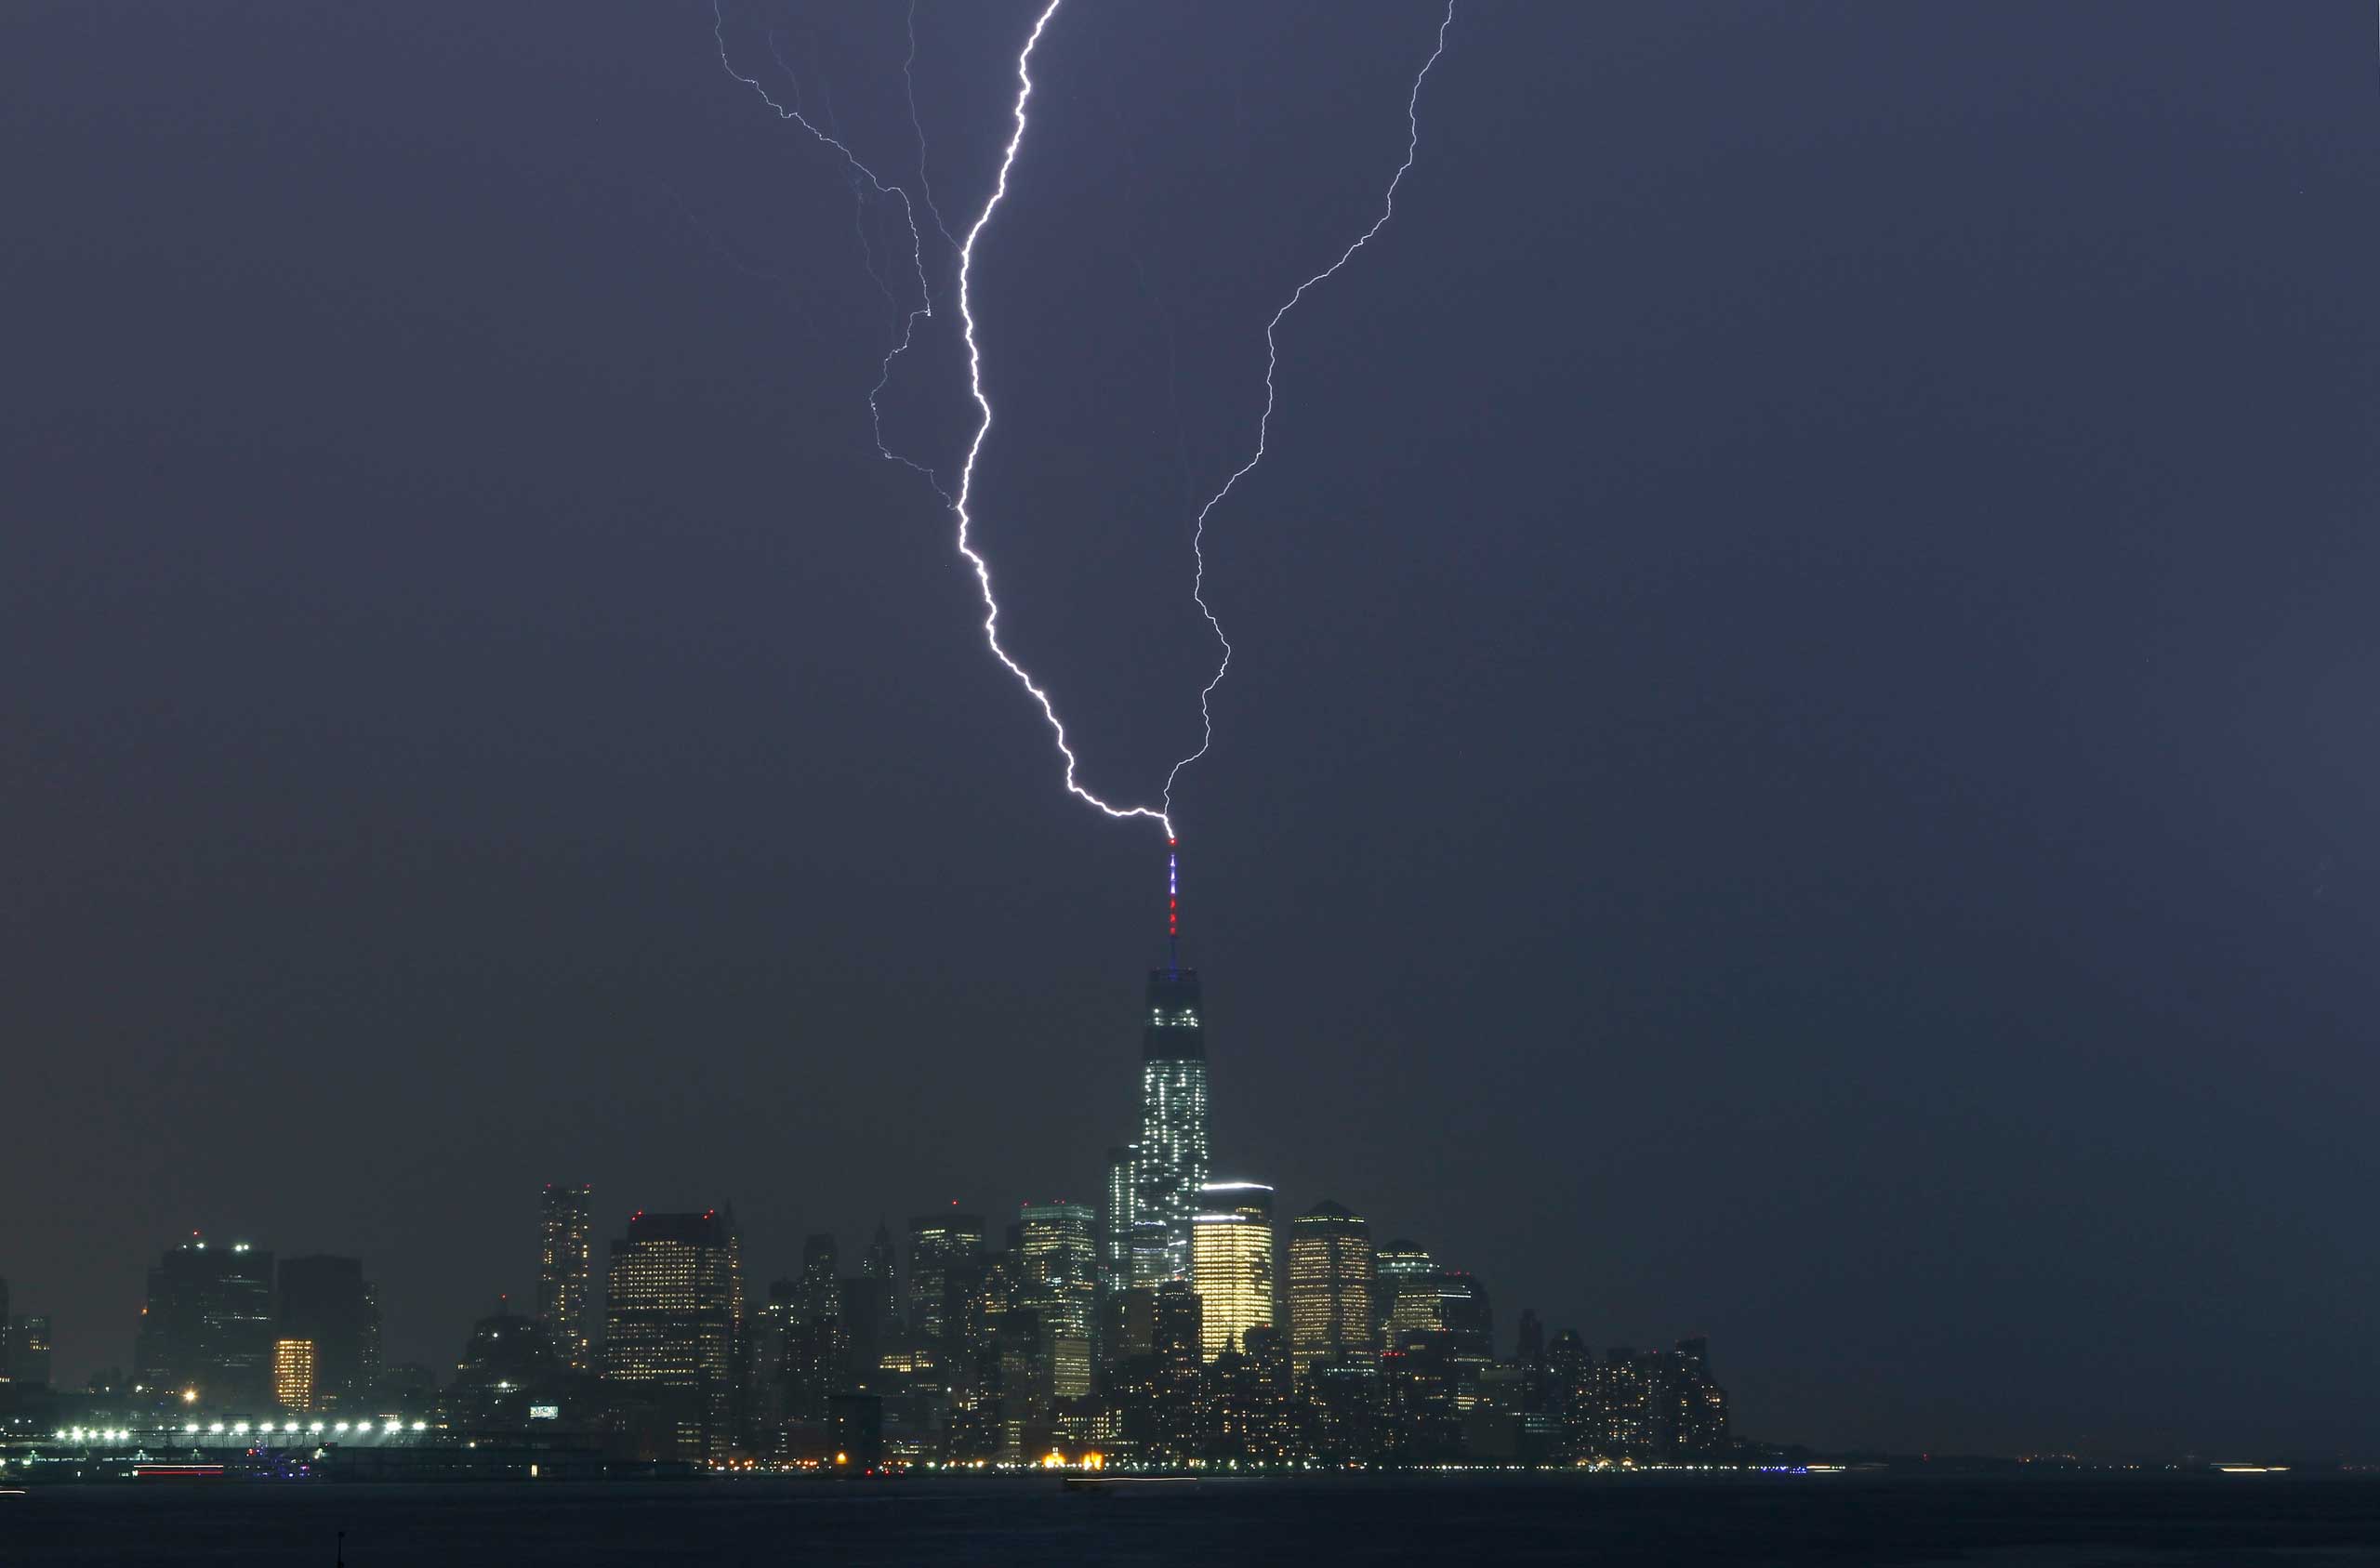 Two bolts of lightning hit the antenna on top of One World Trade Center in Lower Manhattan as an electrical storm moves over New York, May 23, 2014.